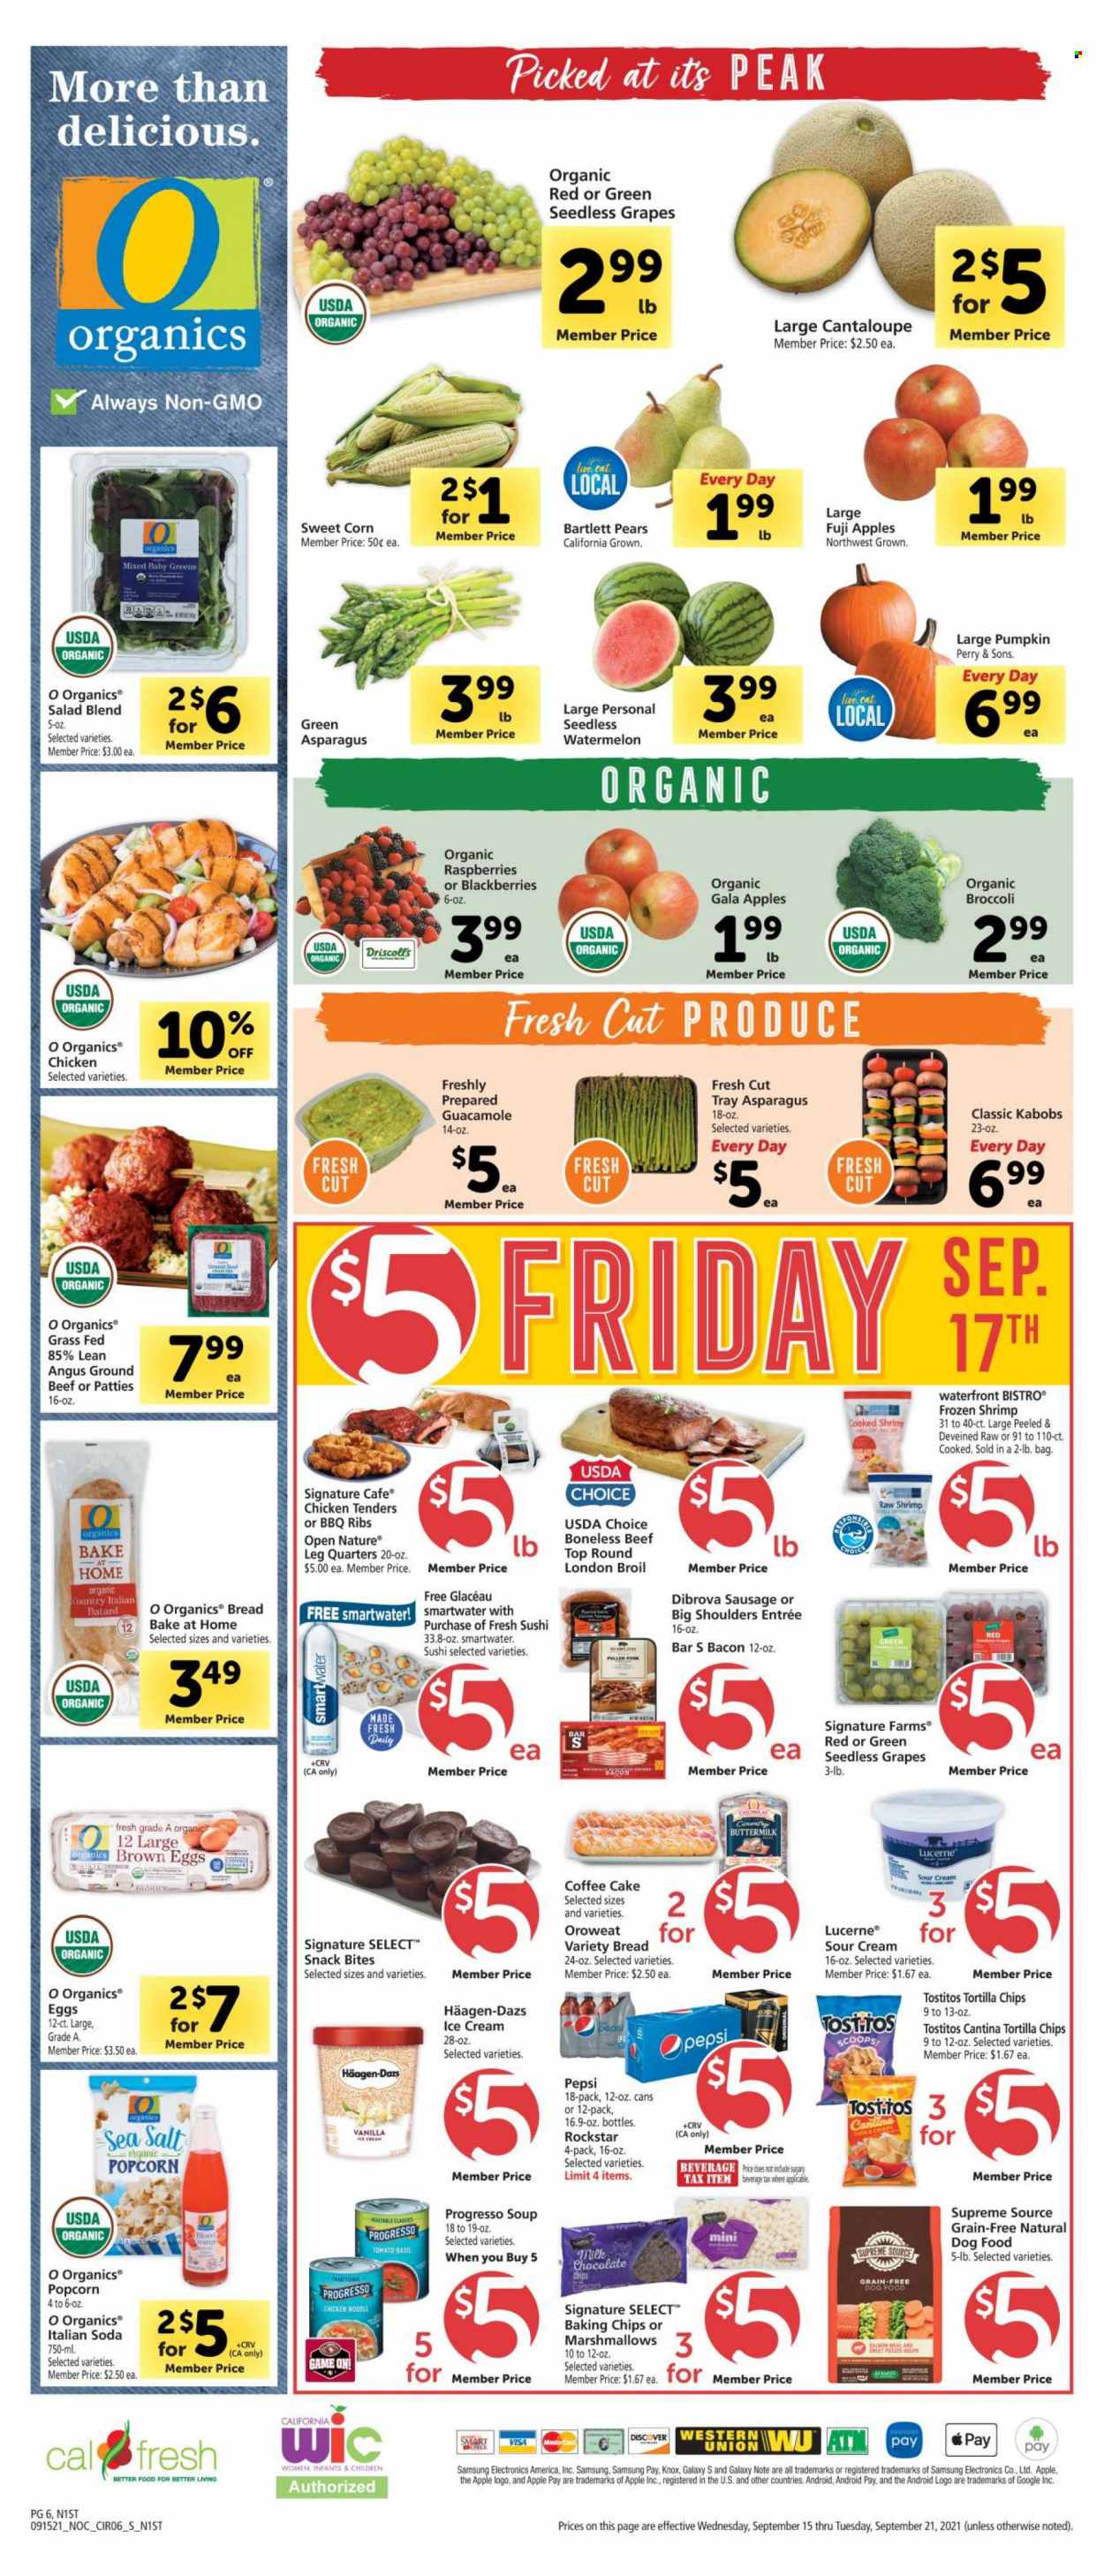 thumbnail - Safeway Flyer - 09/15/2021 - 09/21/2021 - Sales products - Bartlett pears, seedless grapes, bread, cake, coffee cake, asparagus, broccoli, cantaloupe, corn, pumpkin, salad, sweet corn, blackberries, Gala, grapes, watermelon, pears, Fuji apple, chicken tenders, beef meat, ground beef, shrimps, noodles, Progresso, bacon, sausage, buttermilk, eggs, sour cream, ice cream, Häagen-Dazs, marshmallows, snack, tortilla chips, popcorn, Tostitos, baking chips, guacamole, esponja, Pepsi, Rockstar, soda, Smartwater, animal food, dog food. Page 6.